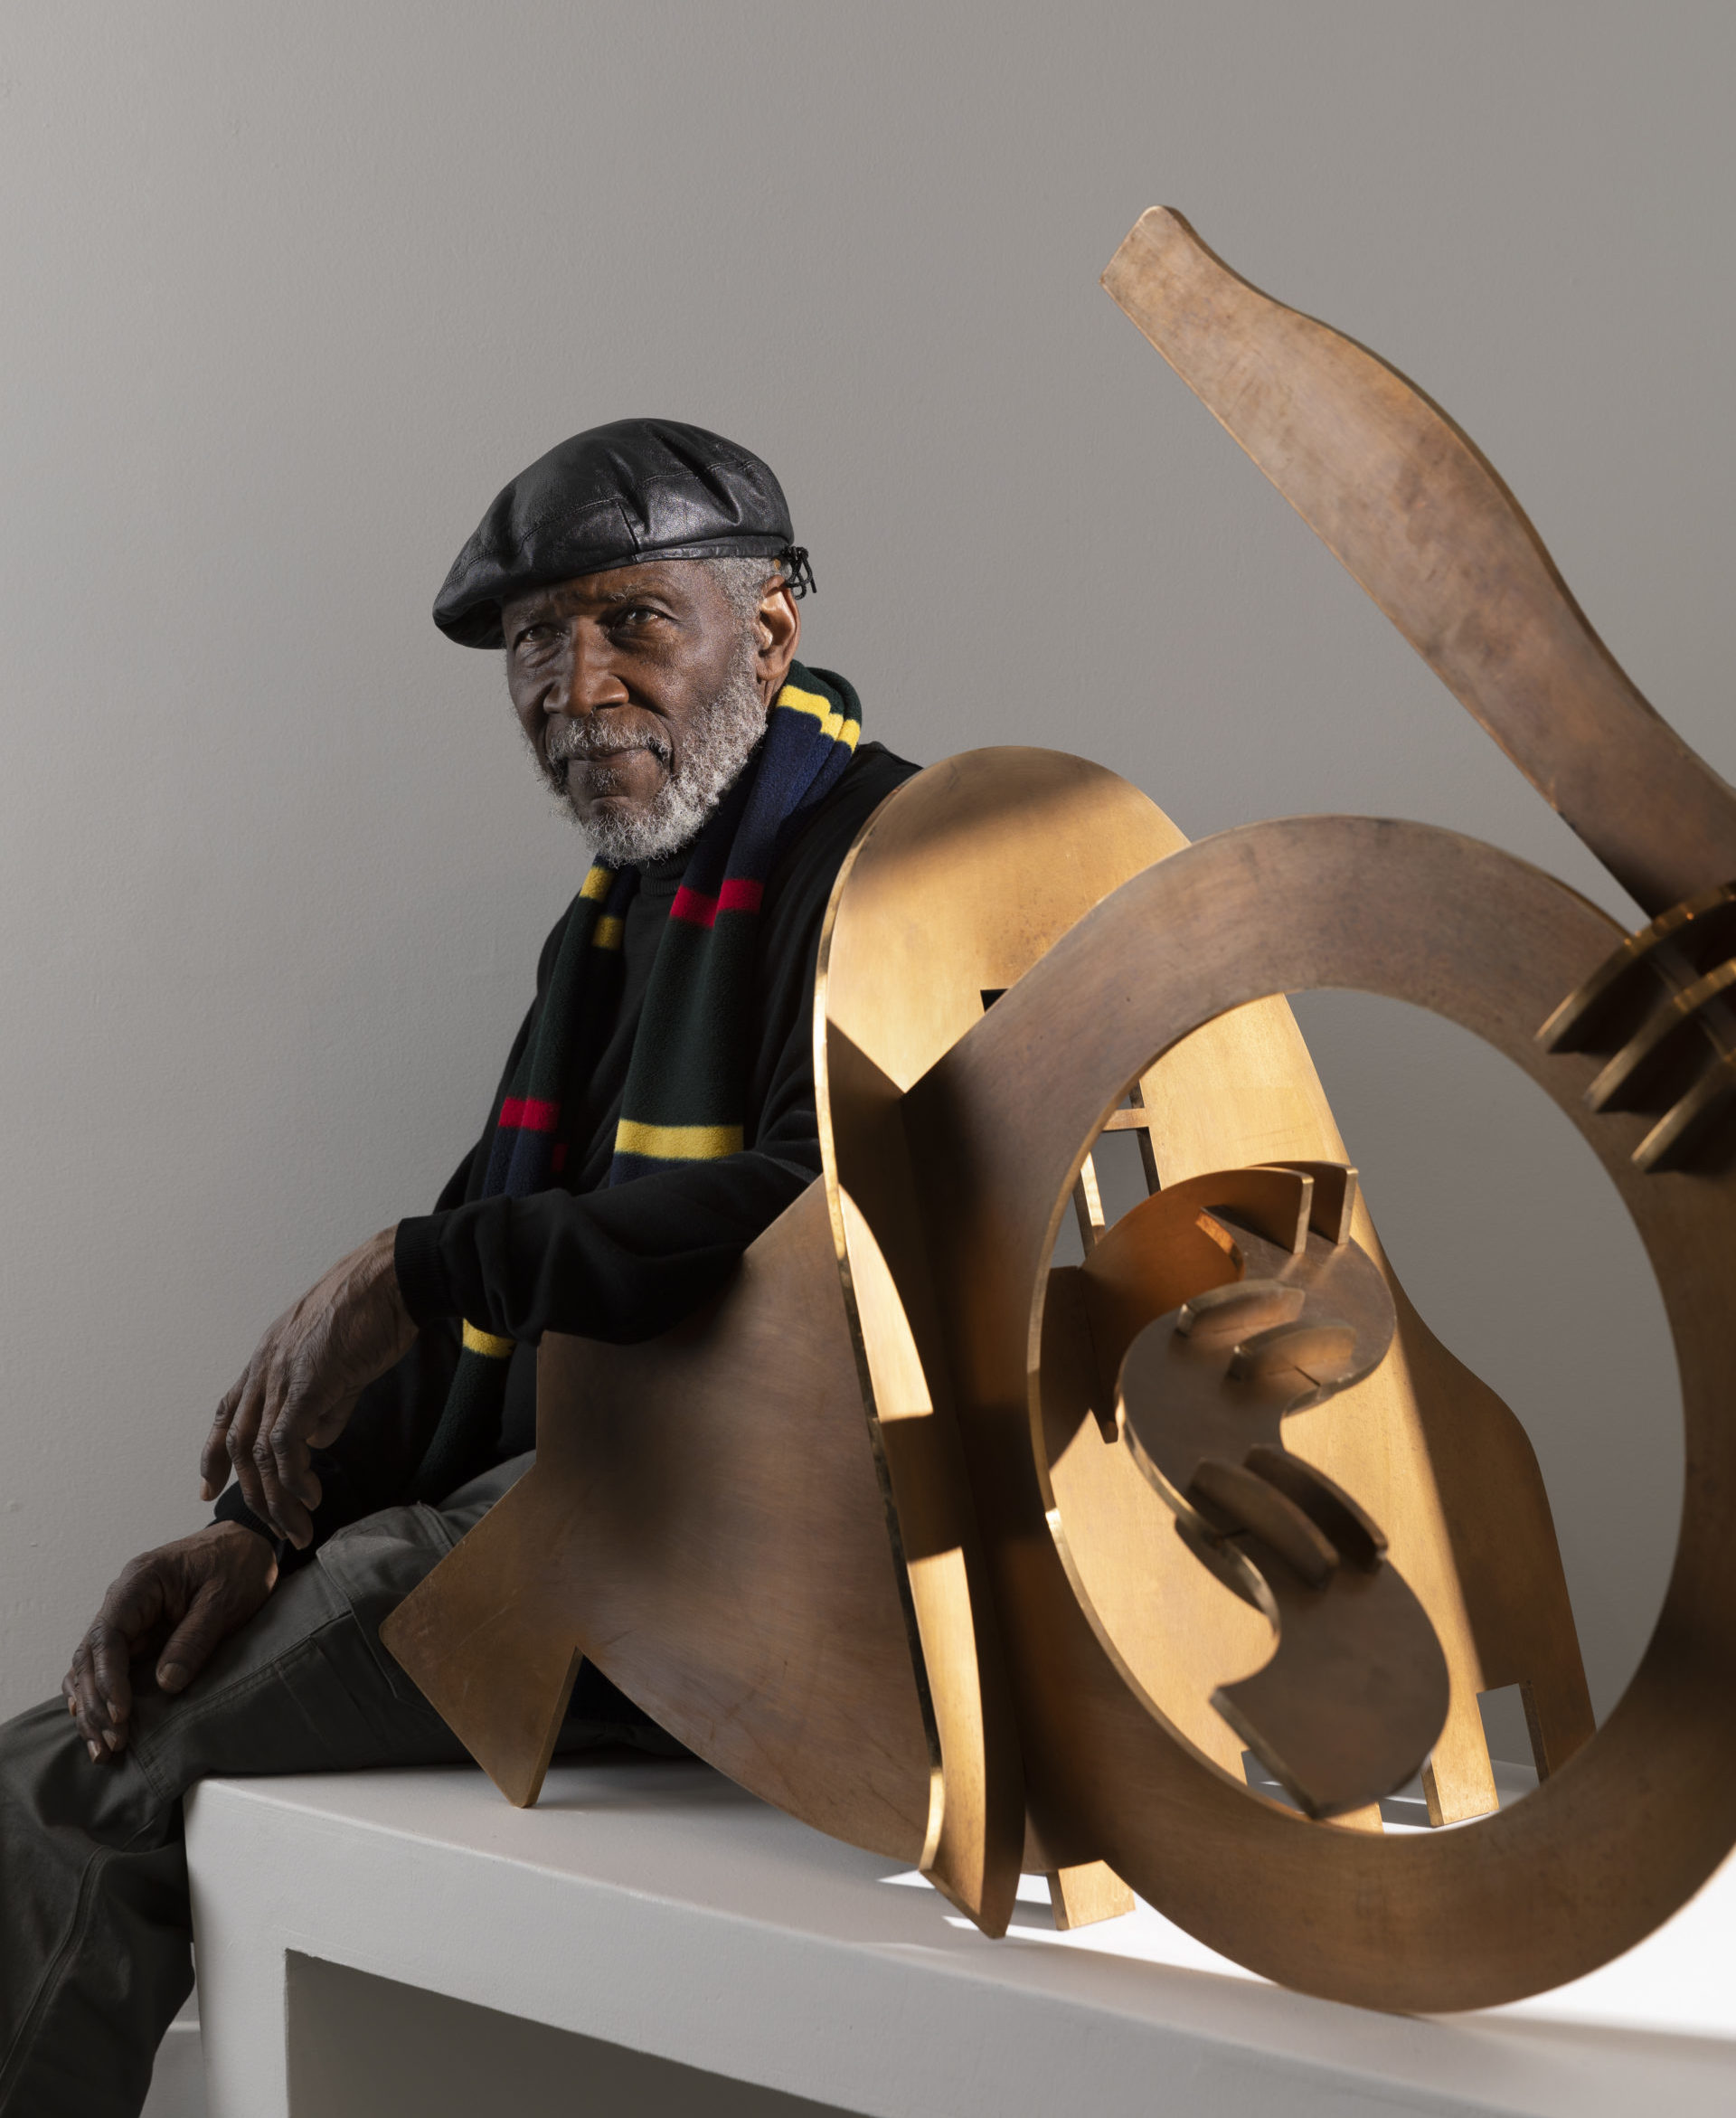 Curtis Patterson sits on a bench beside one of his bronze sculptures. He wears a black leather cap and a red and yellow striped scarf. He has a gray beard and a relaxed demeanor.